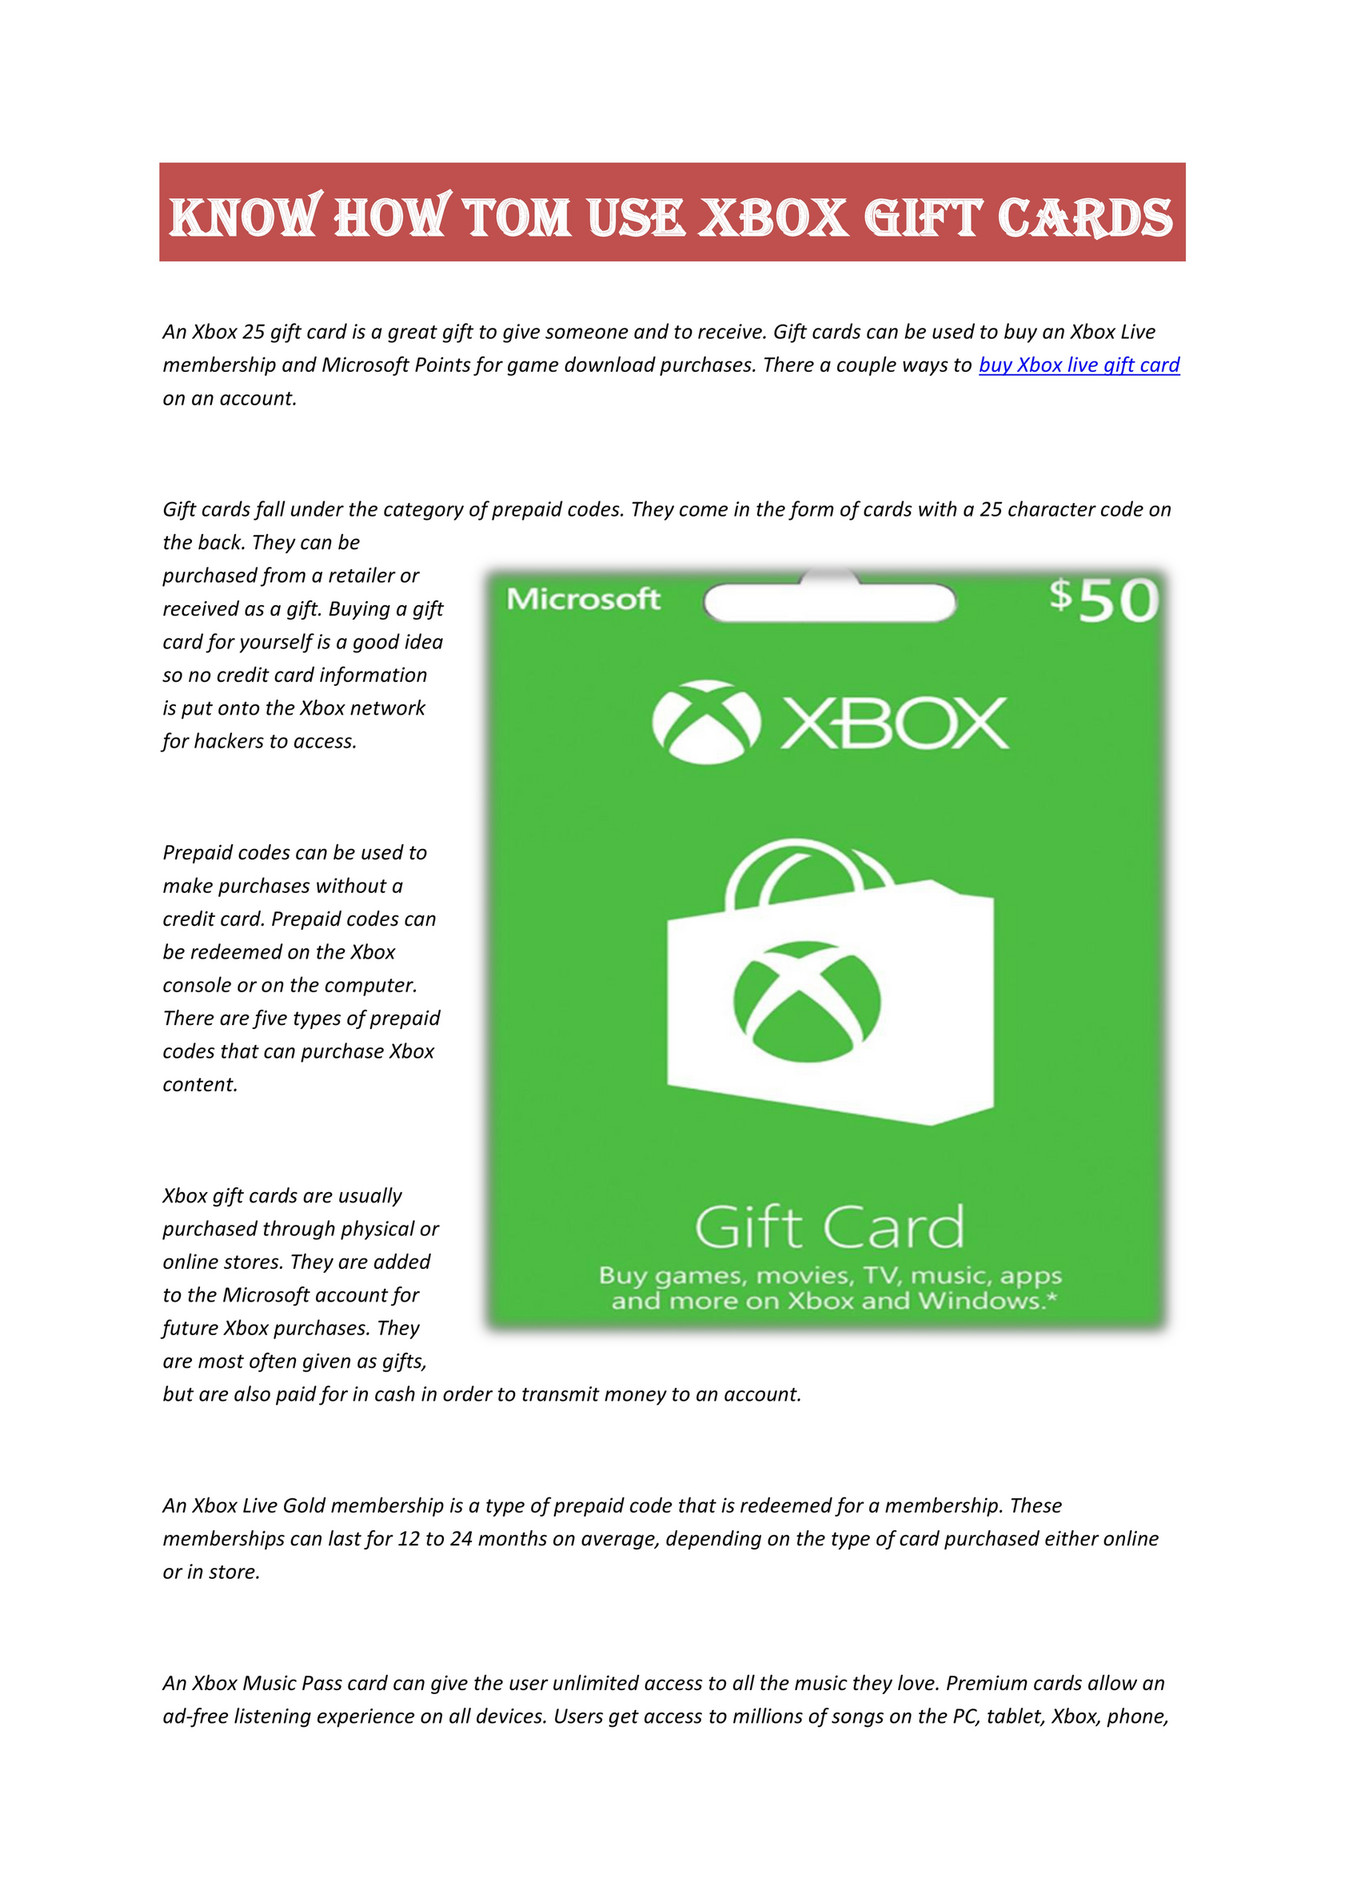 Xbox Gift Cards: Buy Games and Movies on Xbox Consoles and PC